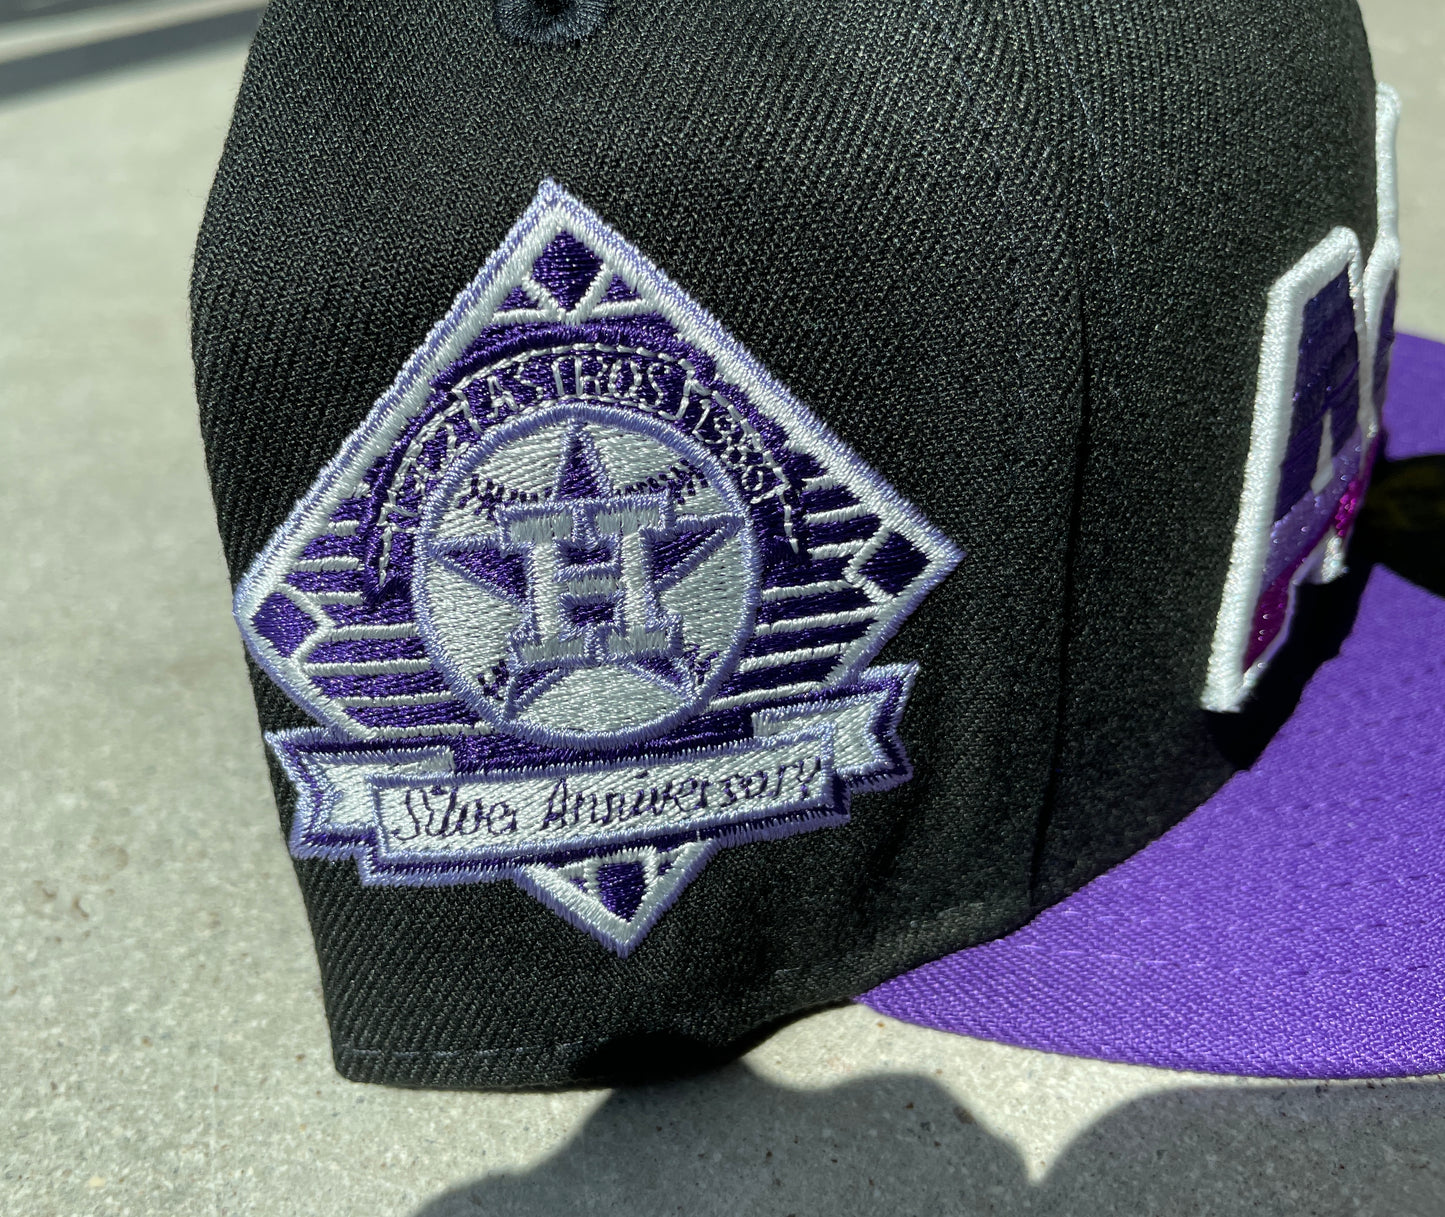 New Era Astros Cooperstown Fitted Hat Purple Black